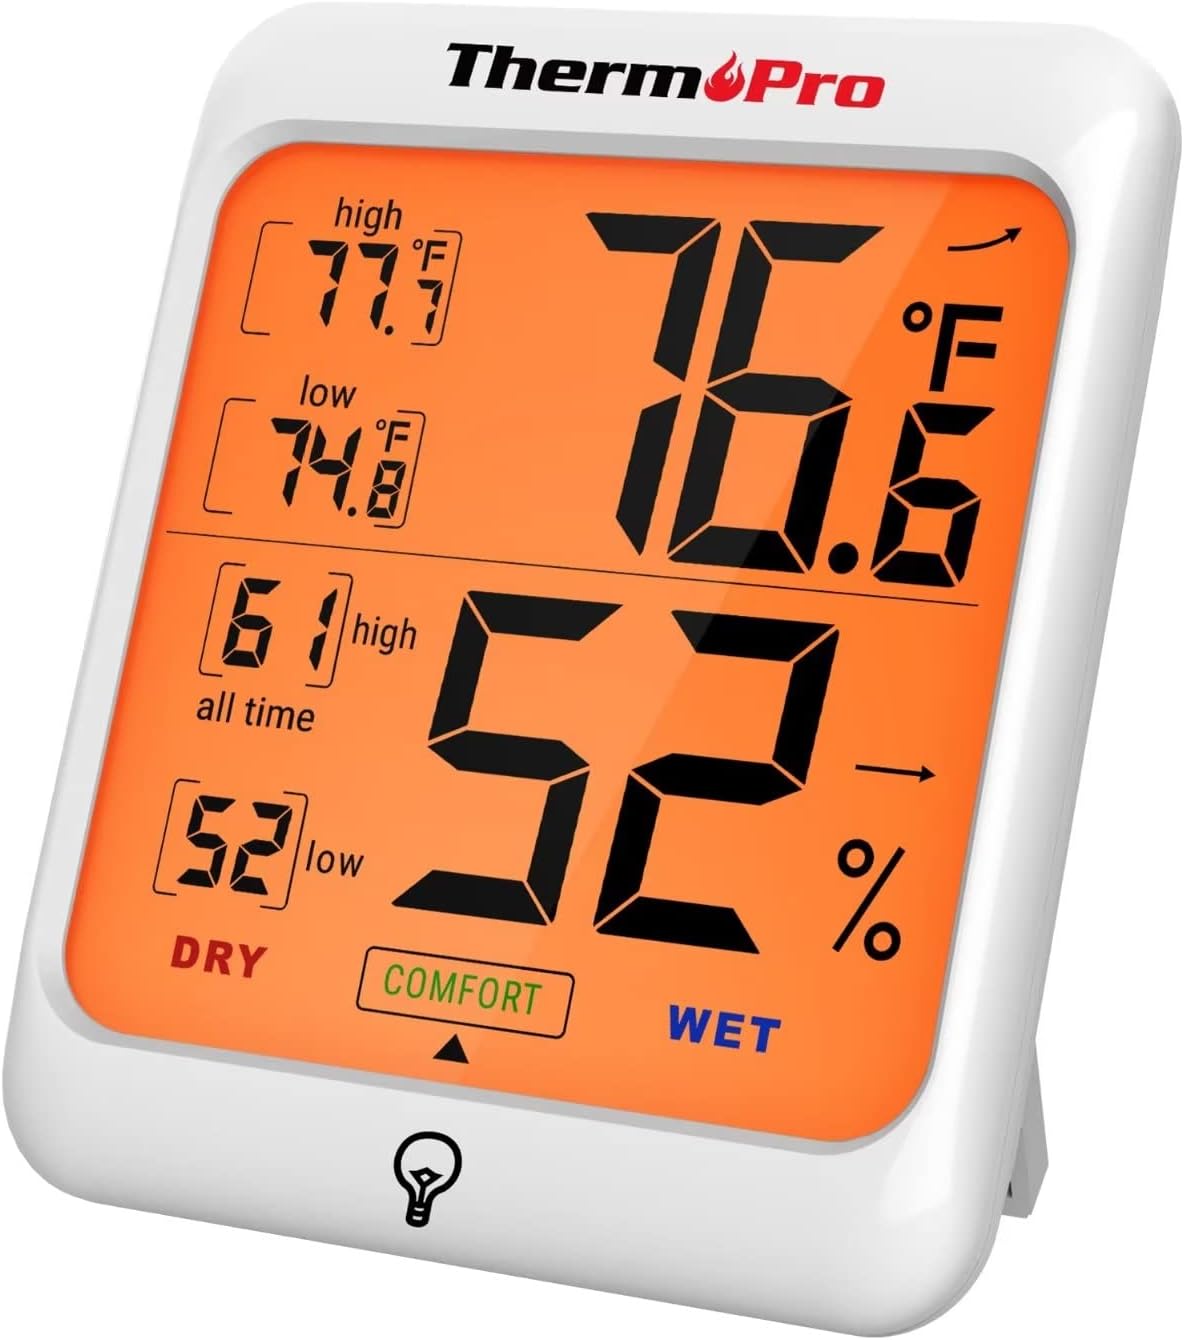 ThermoPro TP53 Digital Hygrometer Indoor Thermometer [...]